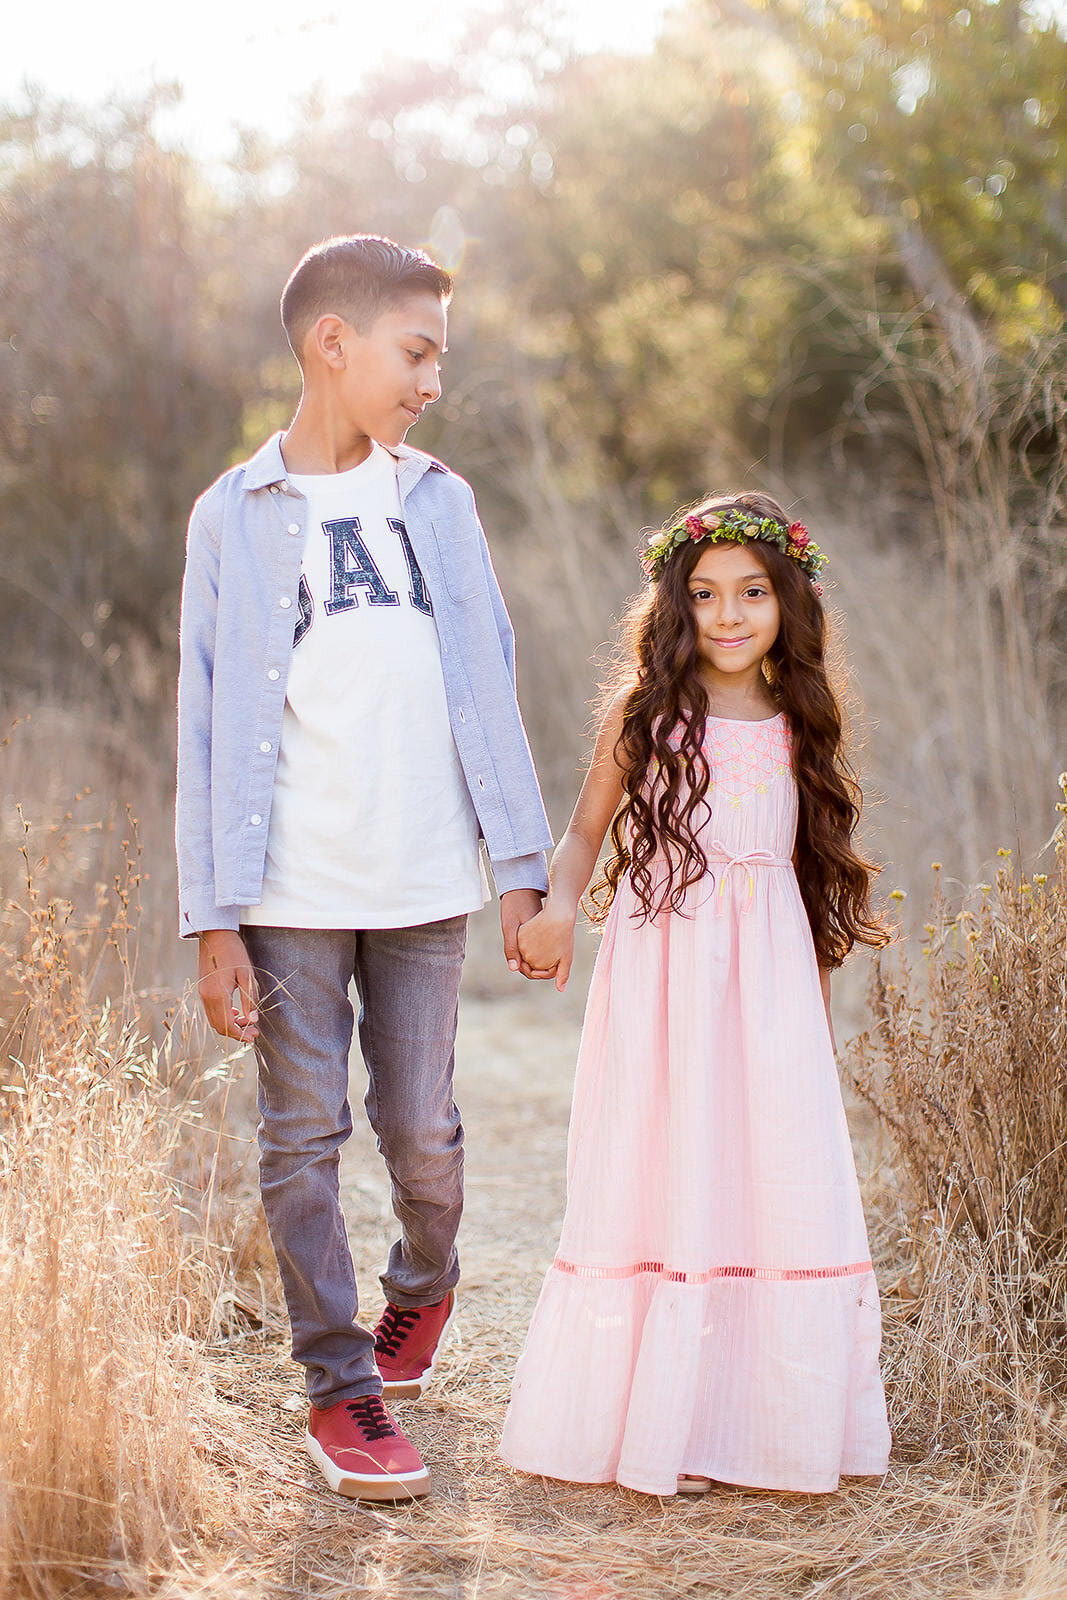 brother and sister holding hands walking through field